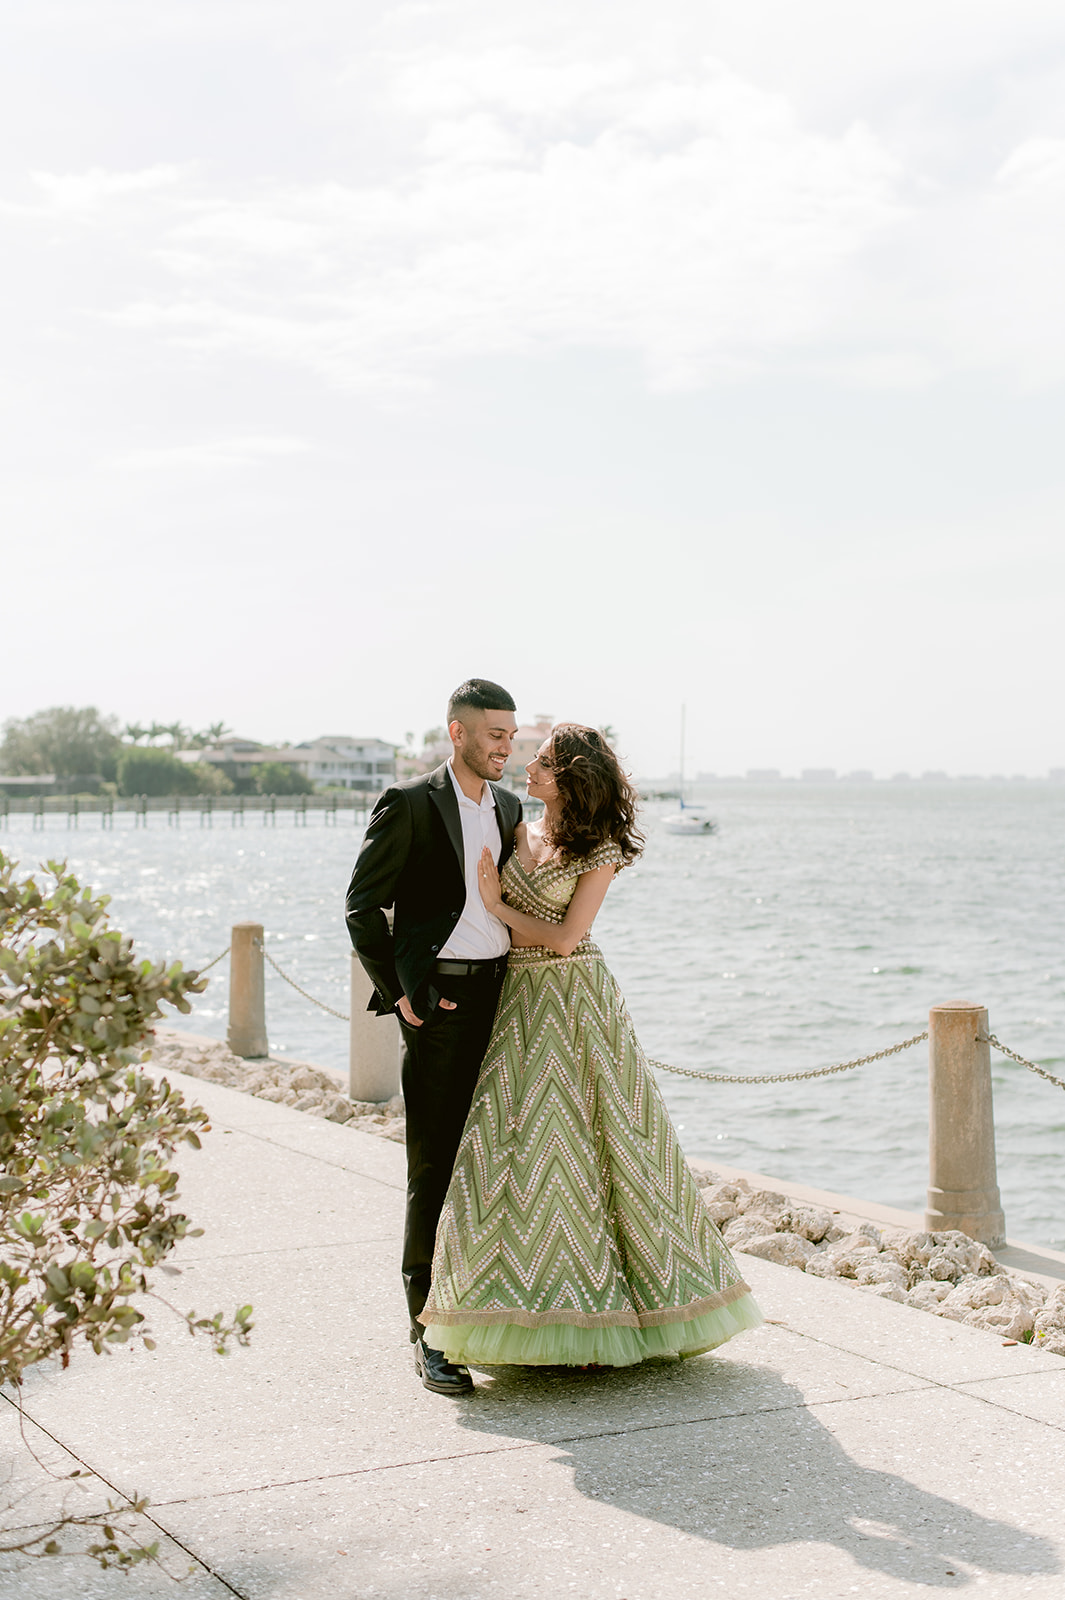 "Stunning Ringling Museum engagement session with beautiful Indian couple in traditional attire and romantic setting"
